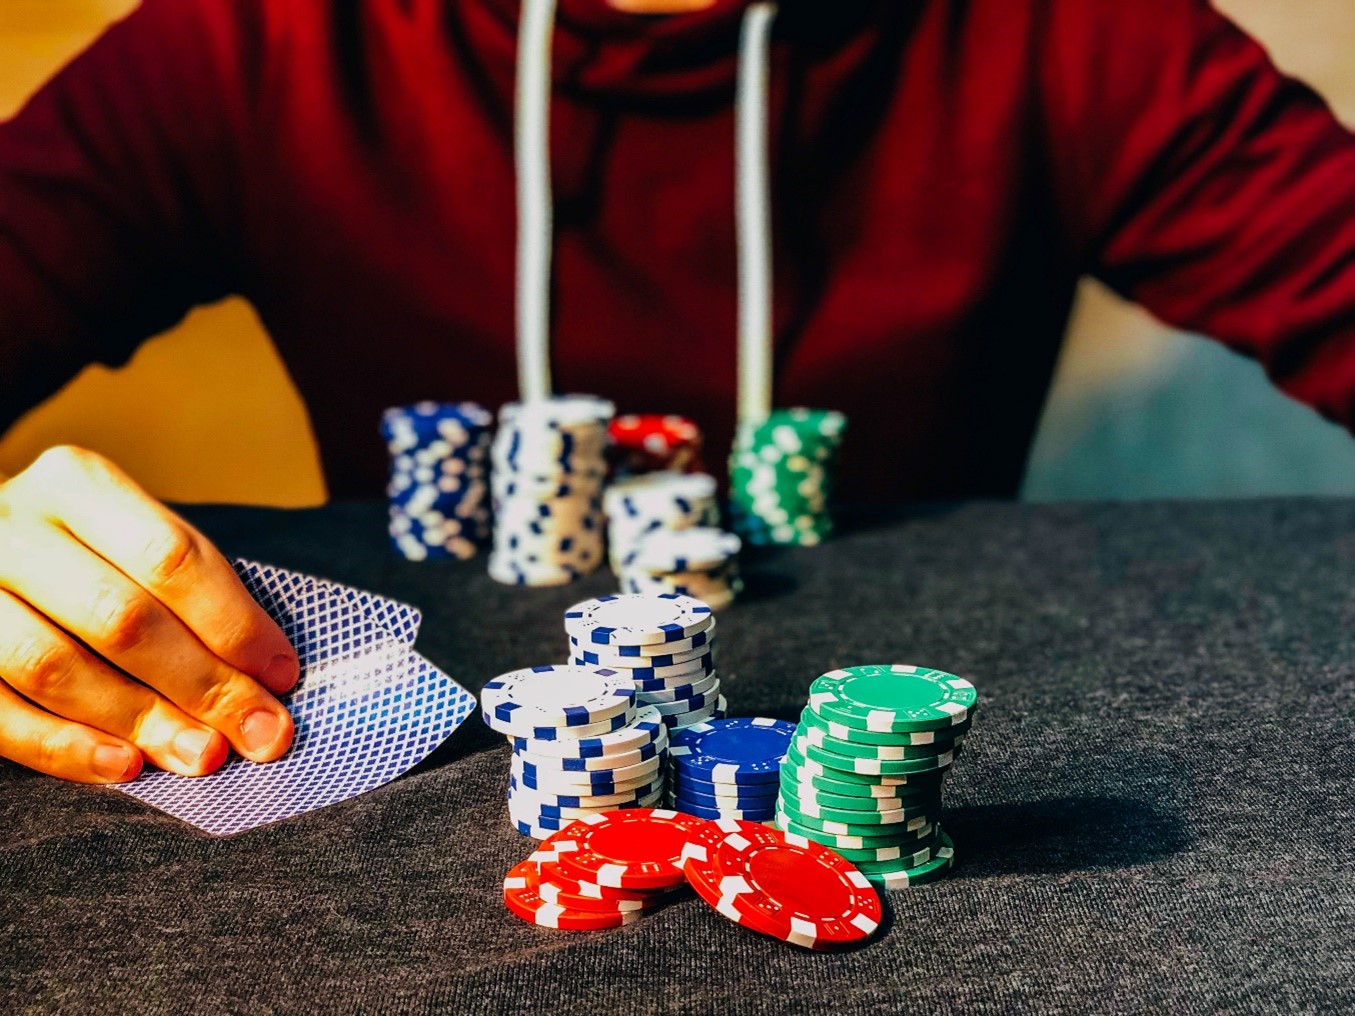 A buyer's agent has negotiation tactics like a person playing poker.